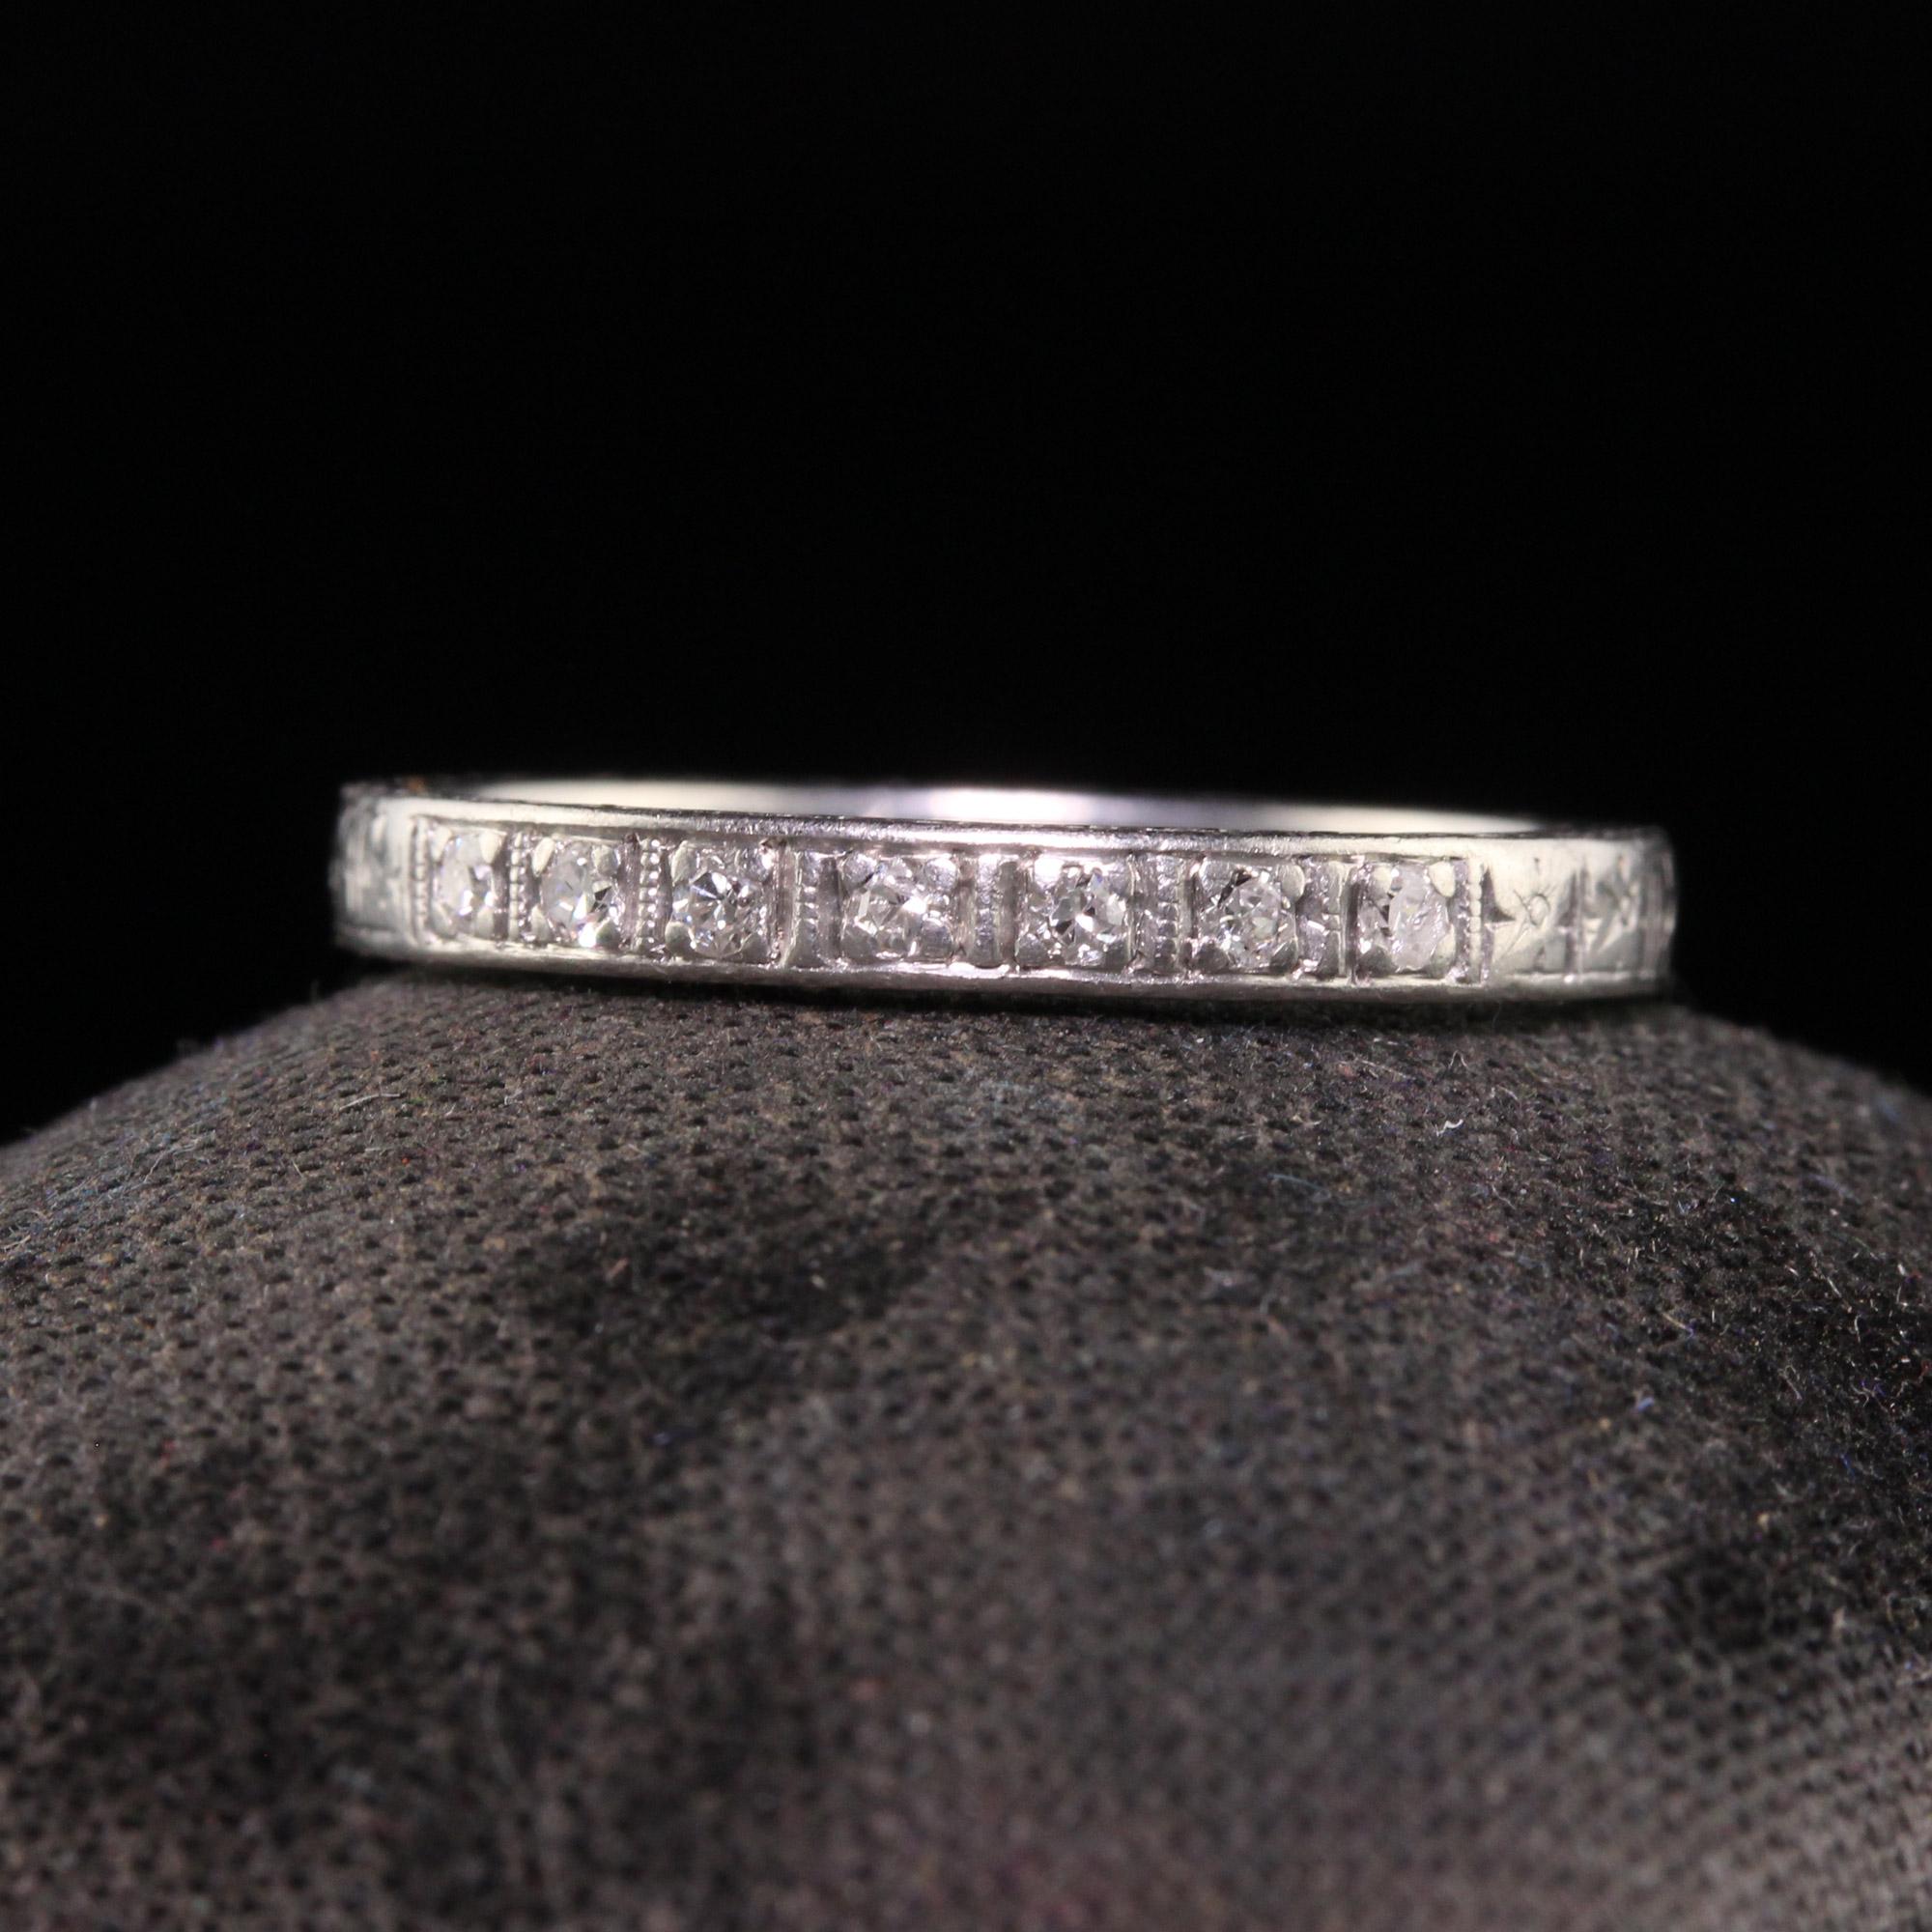 Beautiful Antique Art Deco Platinum Single Cut Diamond Engraved Wedding Band - Size 6 3/4. This beautiful wedding band is crafted in platinum. There are seven single cut diamonds set on top of the band. The ring is beautifully engraved on the top